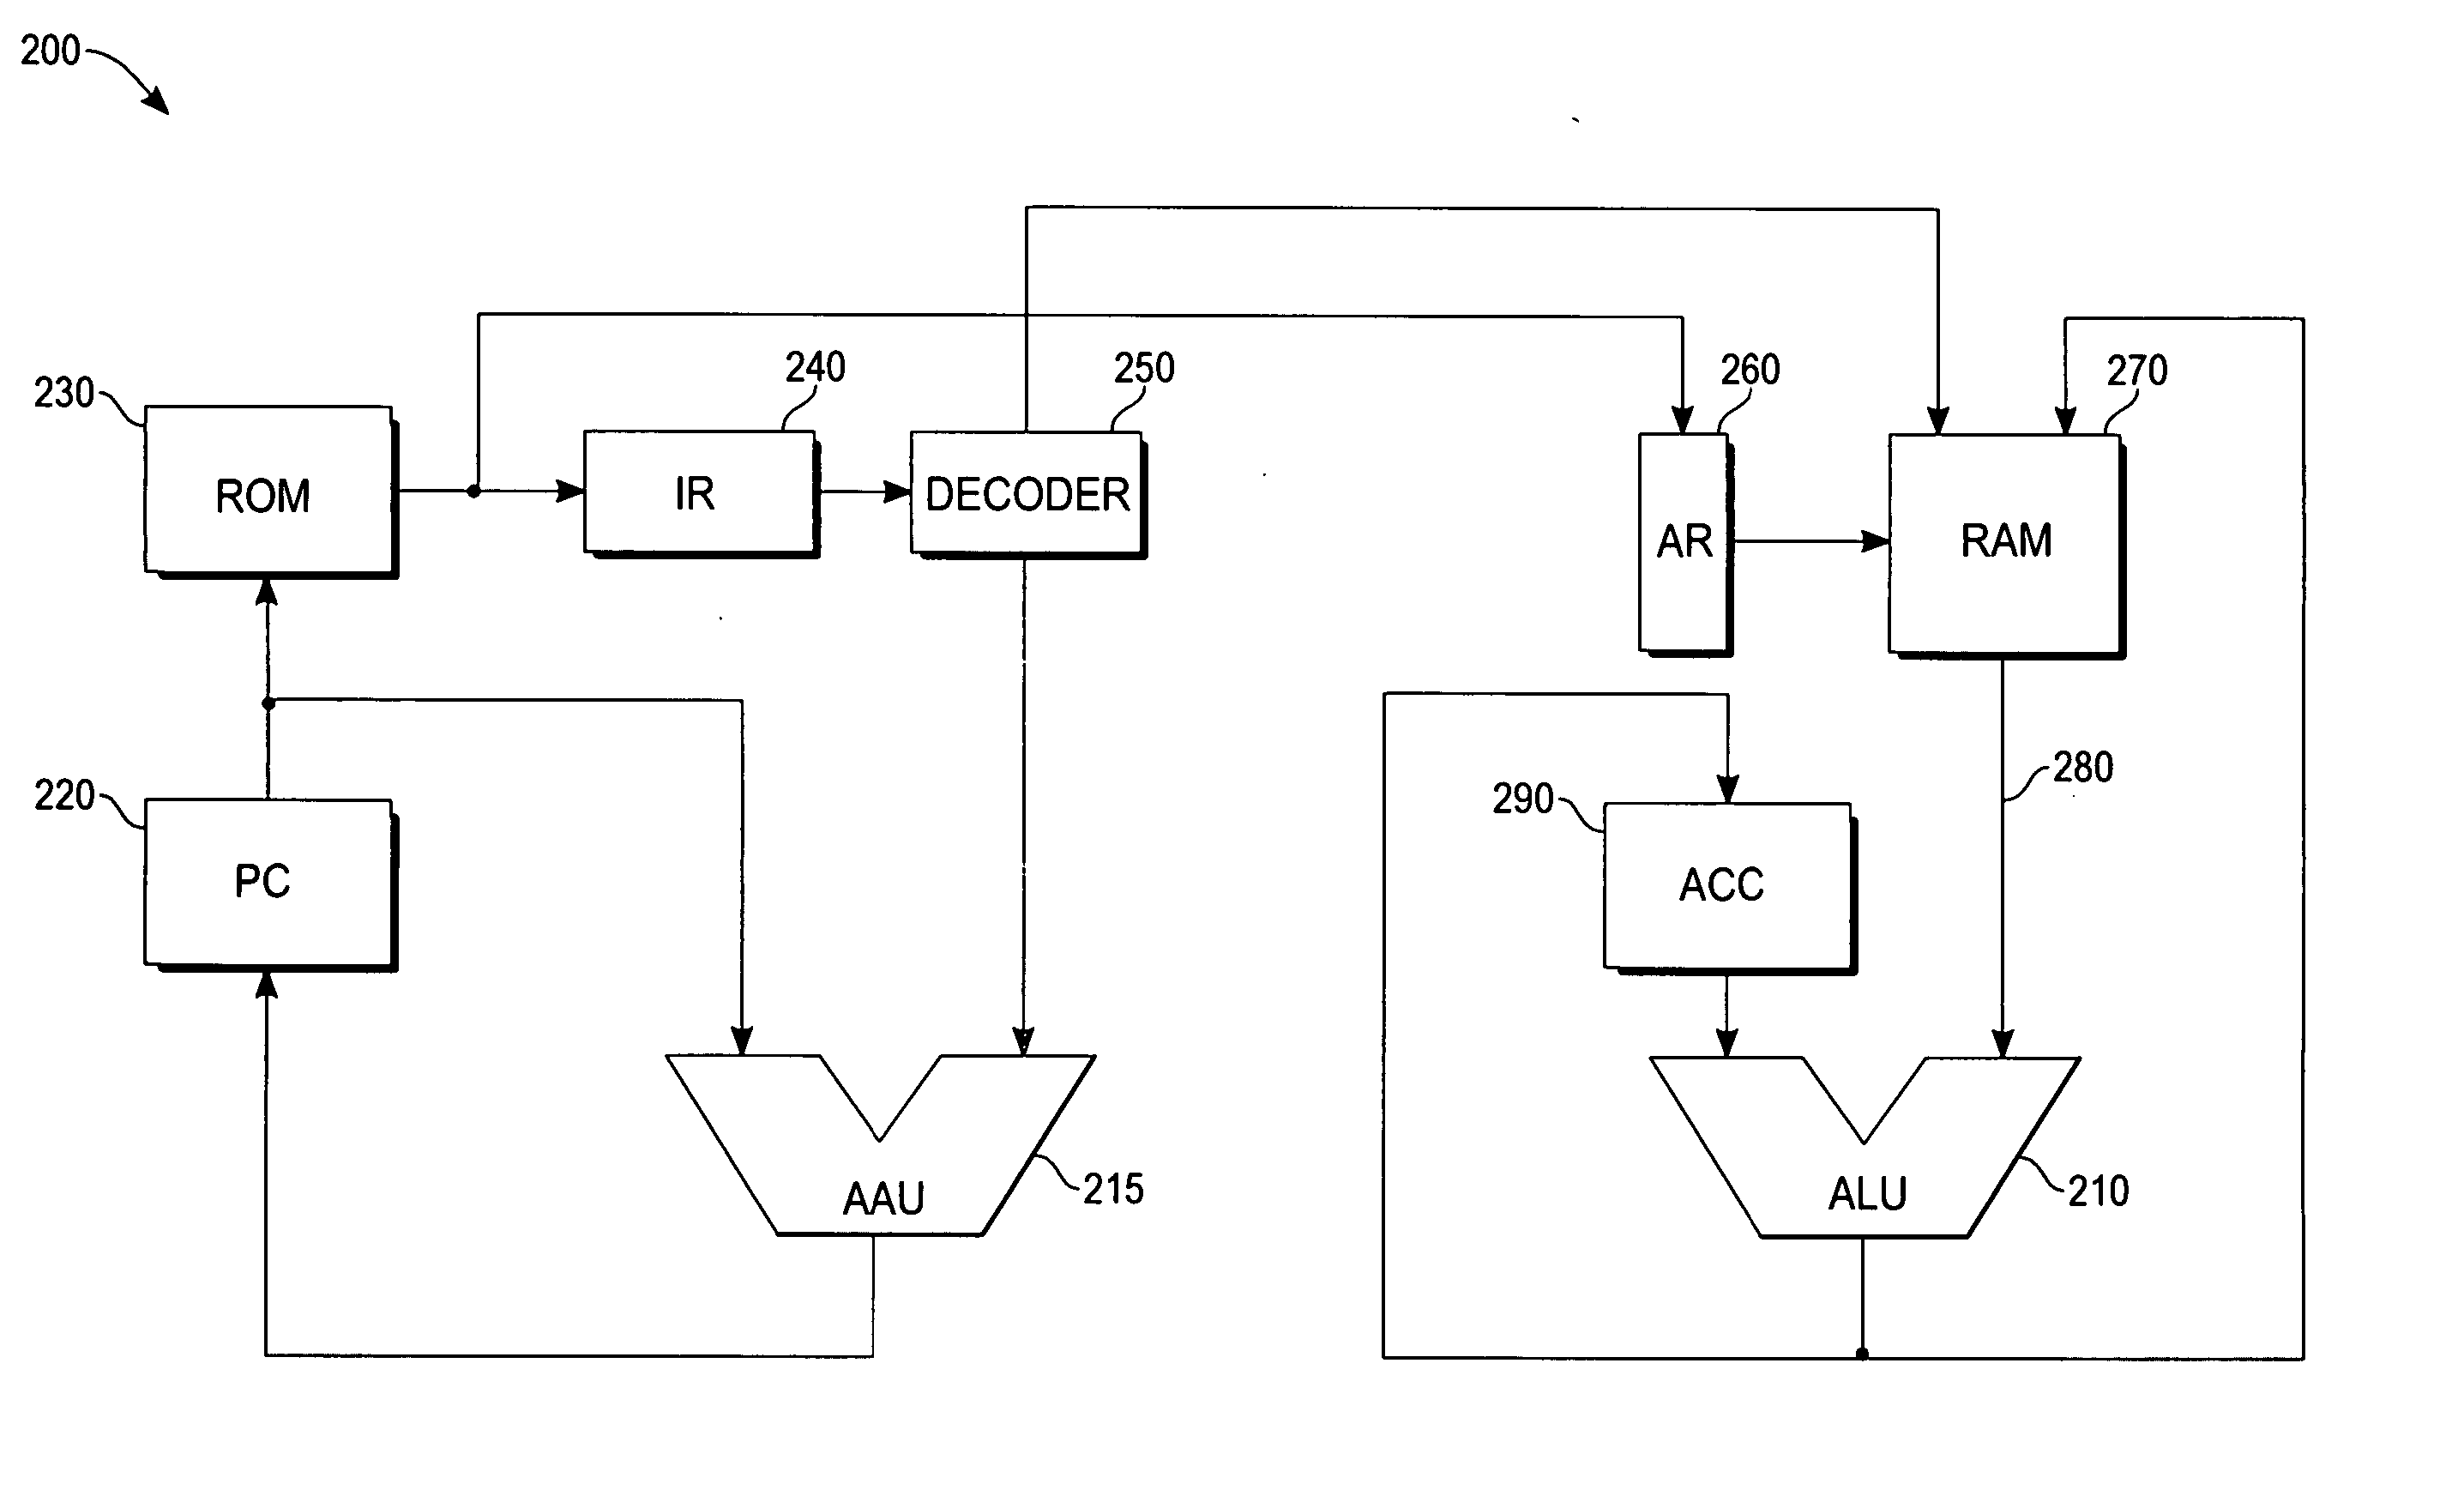 Single-cycle low-power CPU architecture